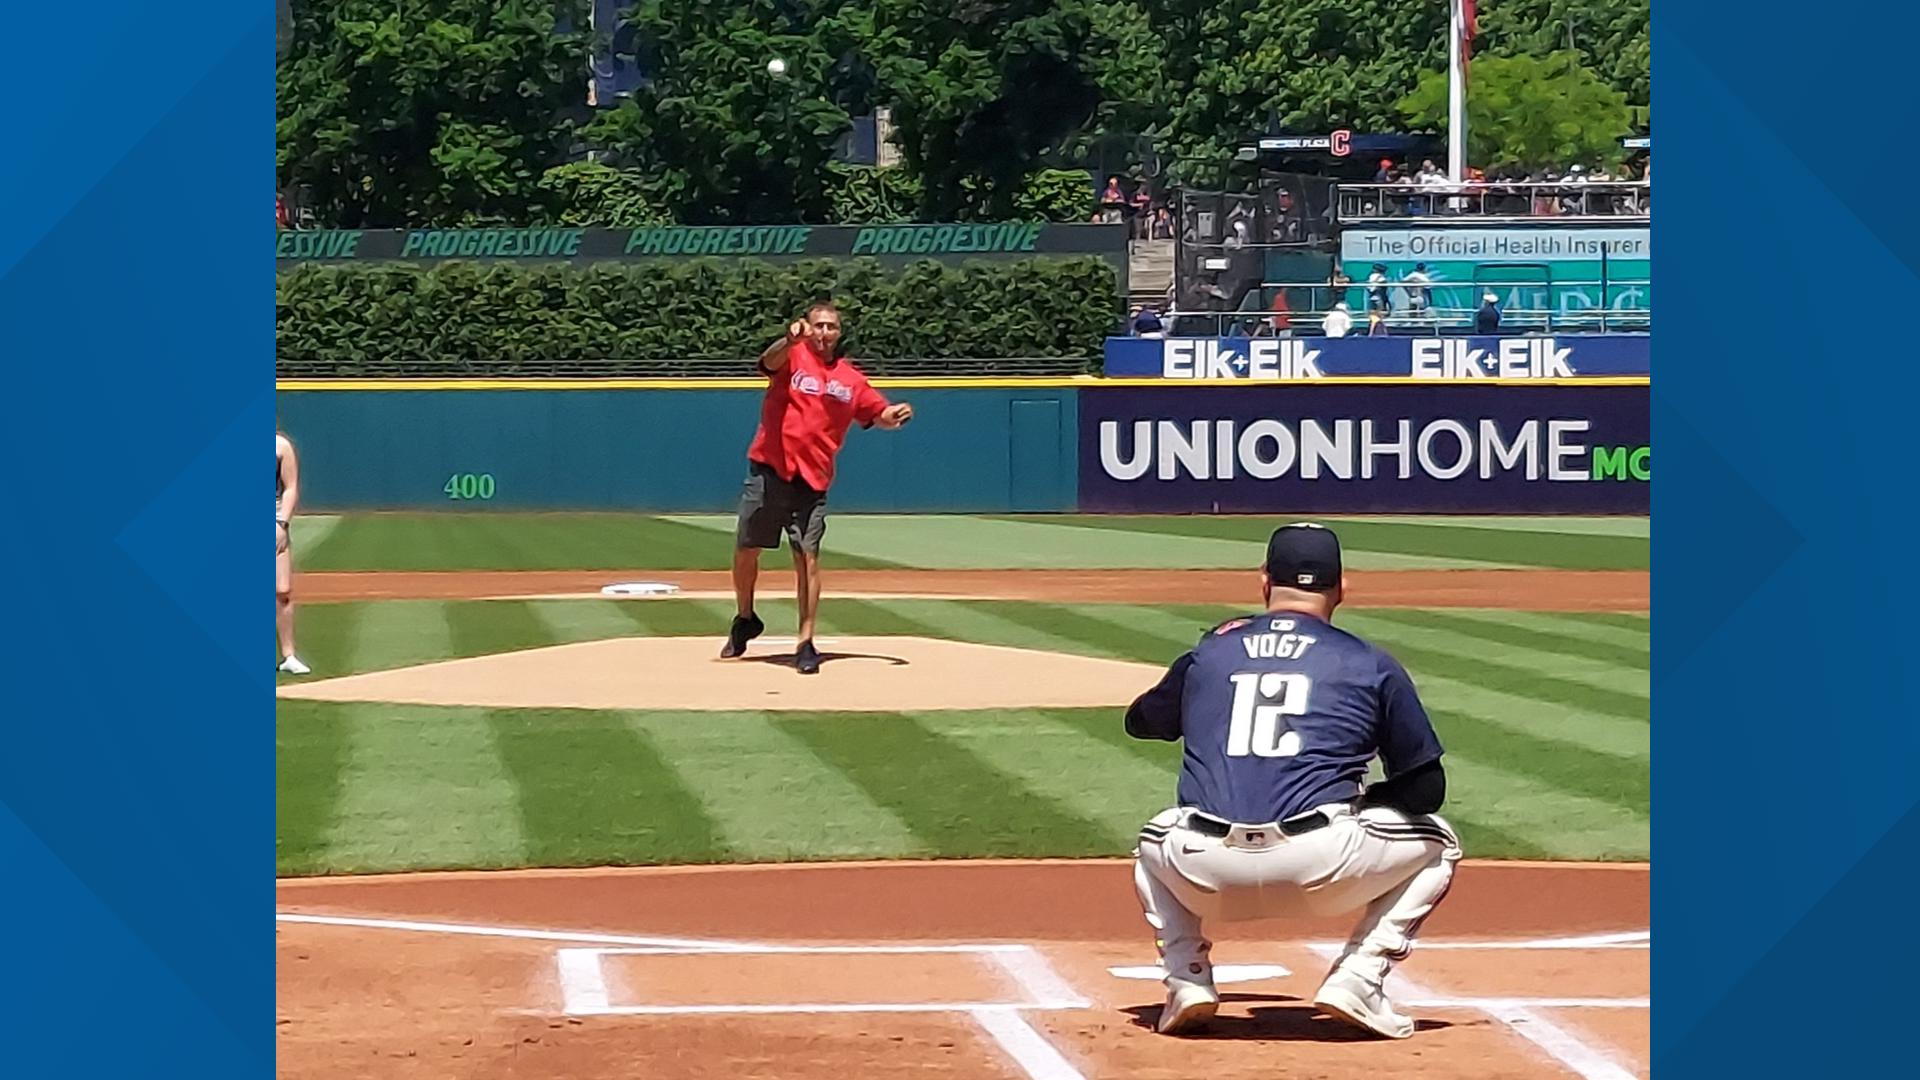 (Credit: Cleveland Guardians) Vince Trusso, the father of fallen officer Jacob Derbin, threw the first pitch ahead of Sunday's Cleveland Guardians game.